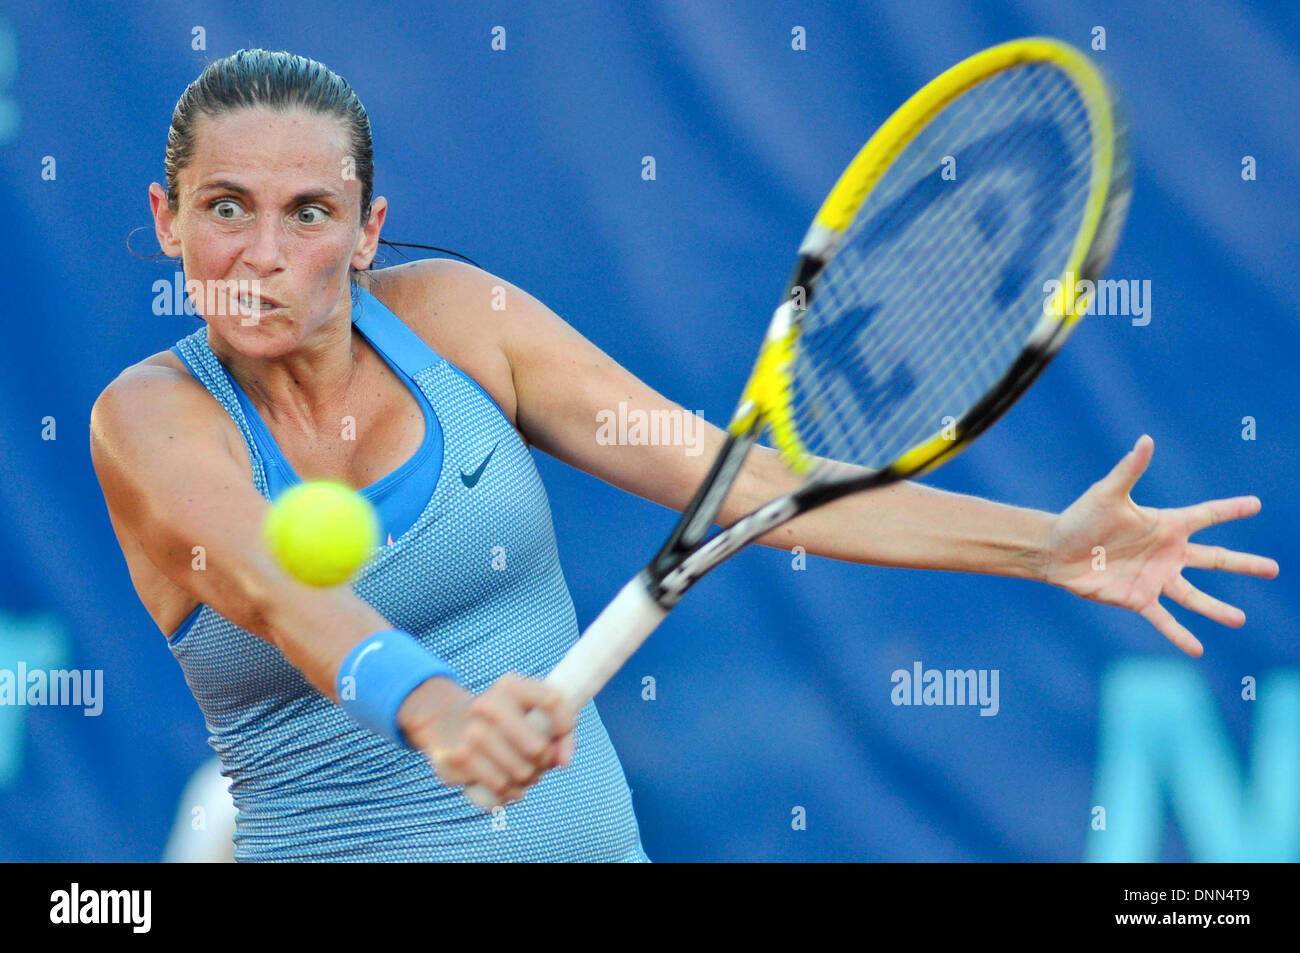 Palermo, Italy. 12th July, 2013. Roberta Vinci, 30, winner of the tournament, playing a slice backhand, in Palermo, Italy, on July 12, 2013.Photo: Guglielmo Mangiapane/NurPhoto © Guglielmo Mangiapane/NurPhoto/ZUMAPRESS.com/Alamy Live News Stock Photo